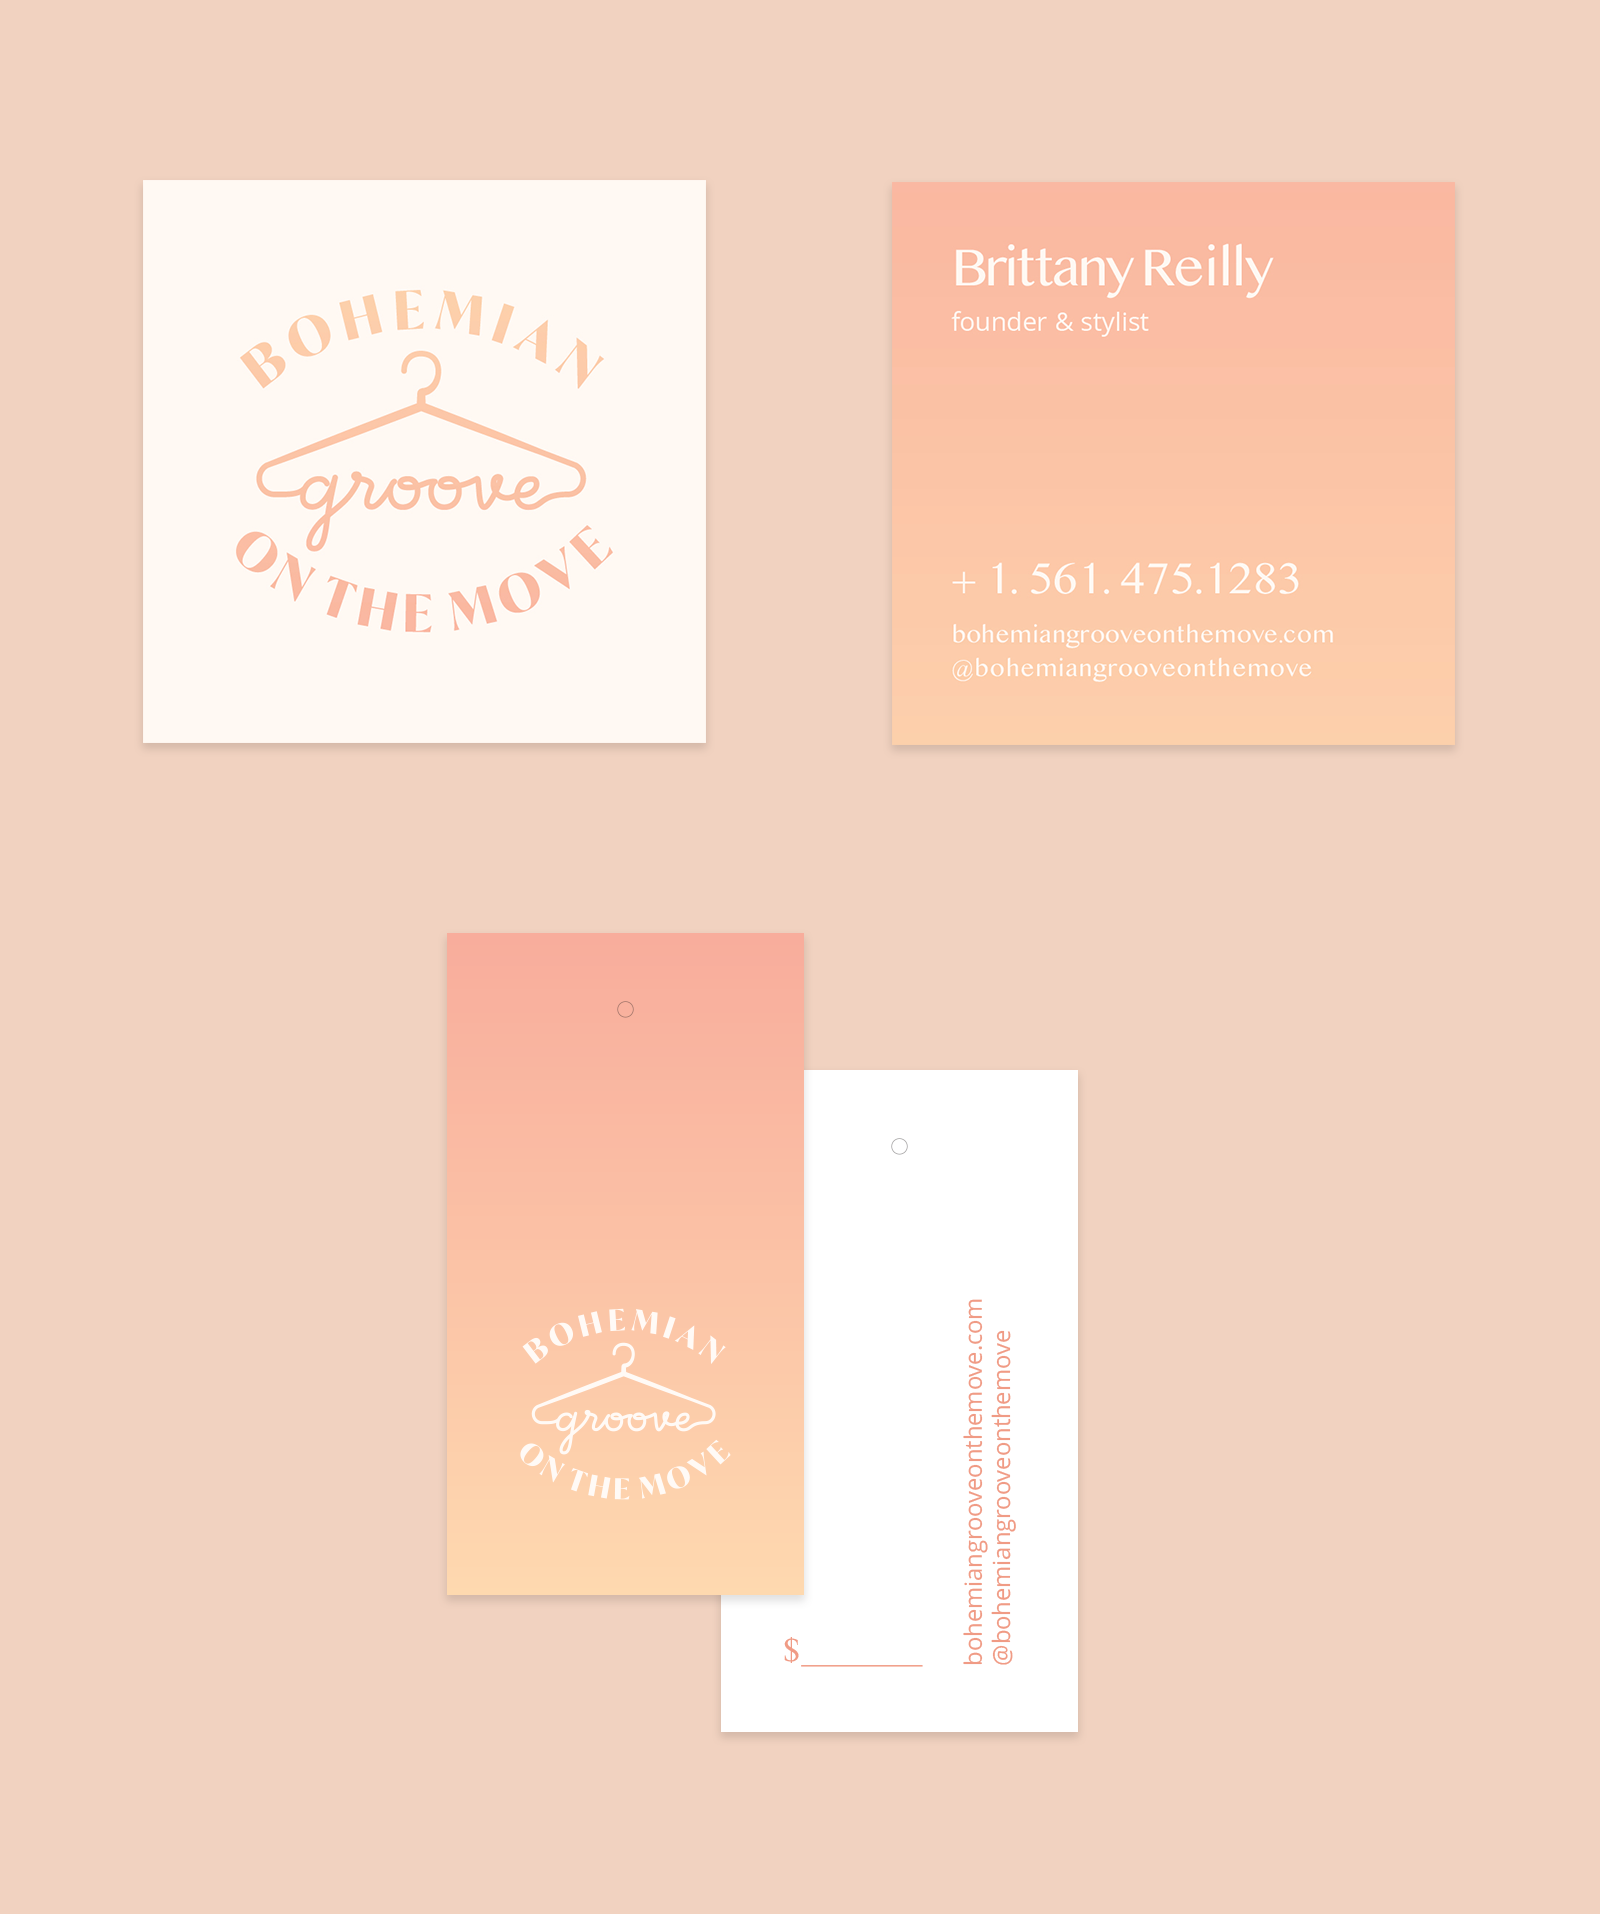 Business card and hang tag designs are shown off on a peach background. One side of the cards are white with a peach sunset gradient, while the other side is inverted with the peach sunset gradient with white type.